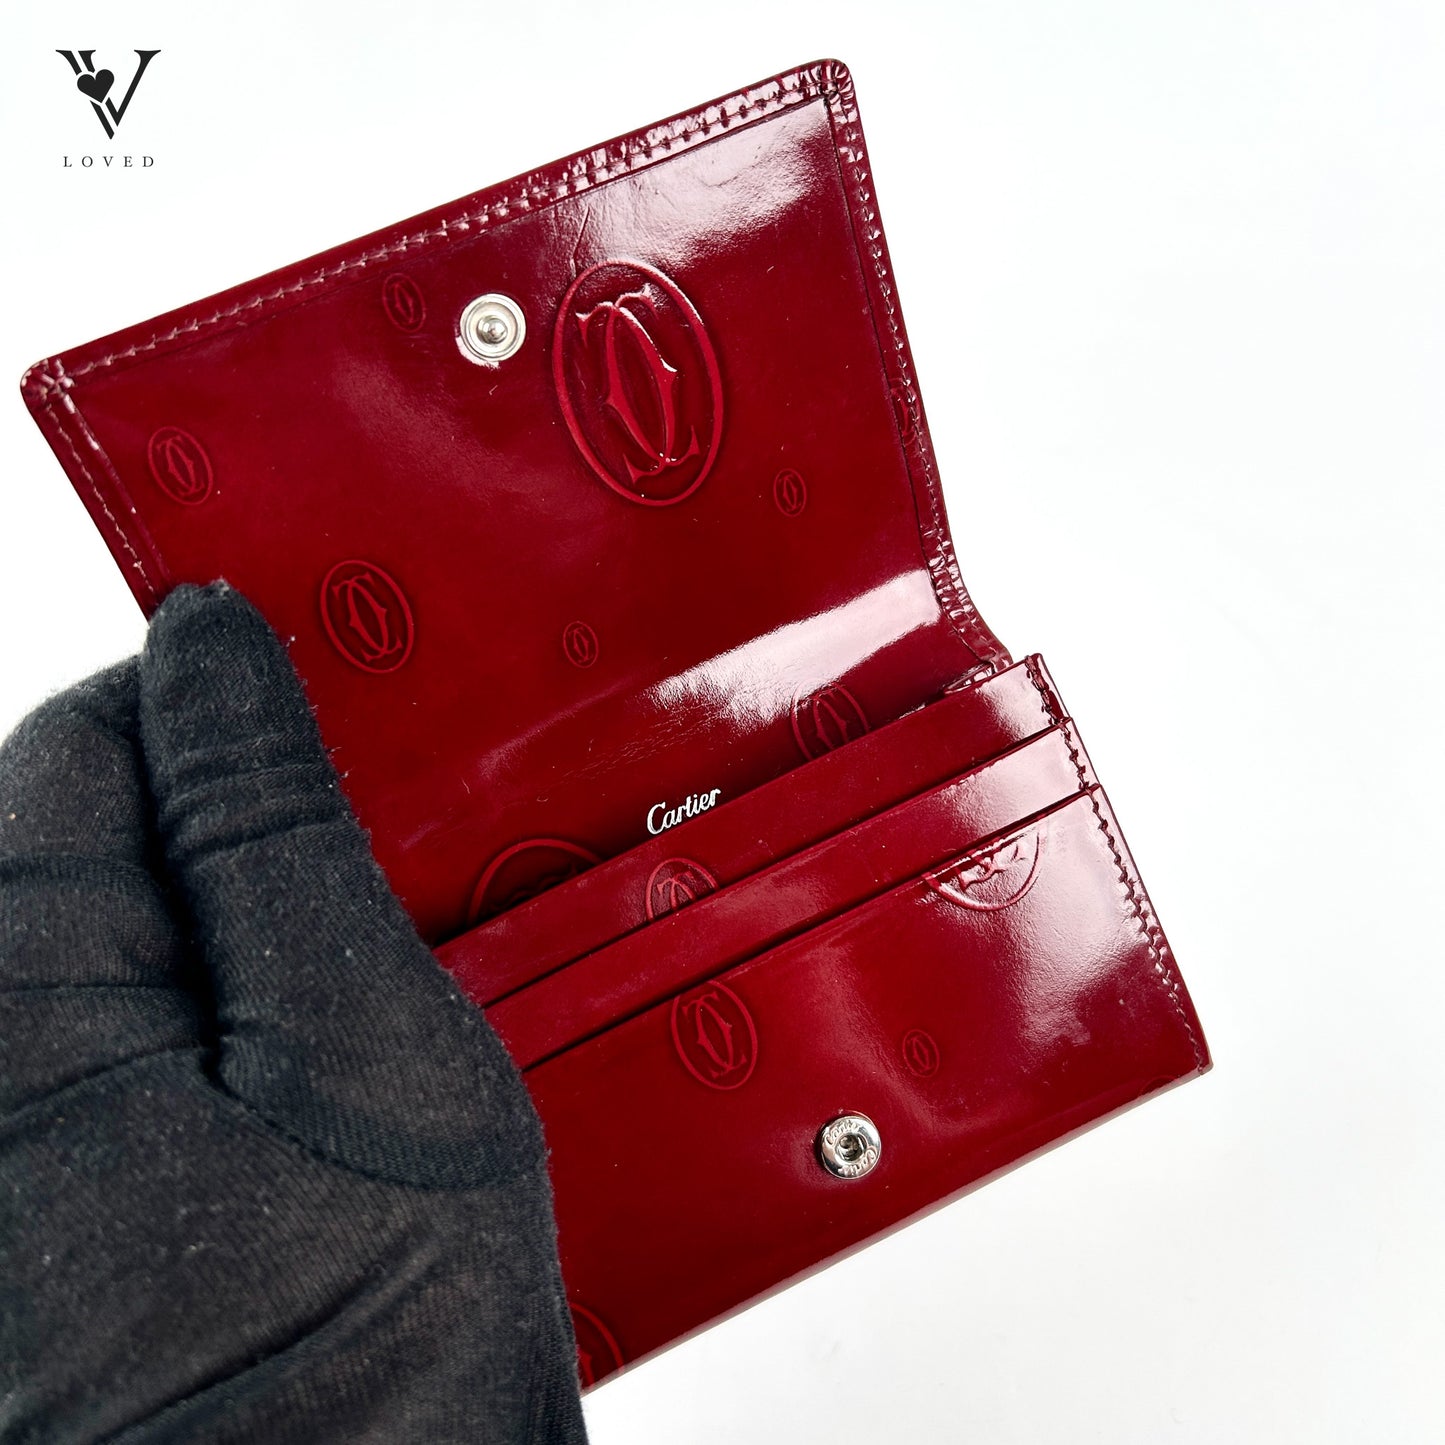 Happy Birthday Bifold Compact Wallet in Red Glossy Leather